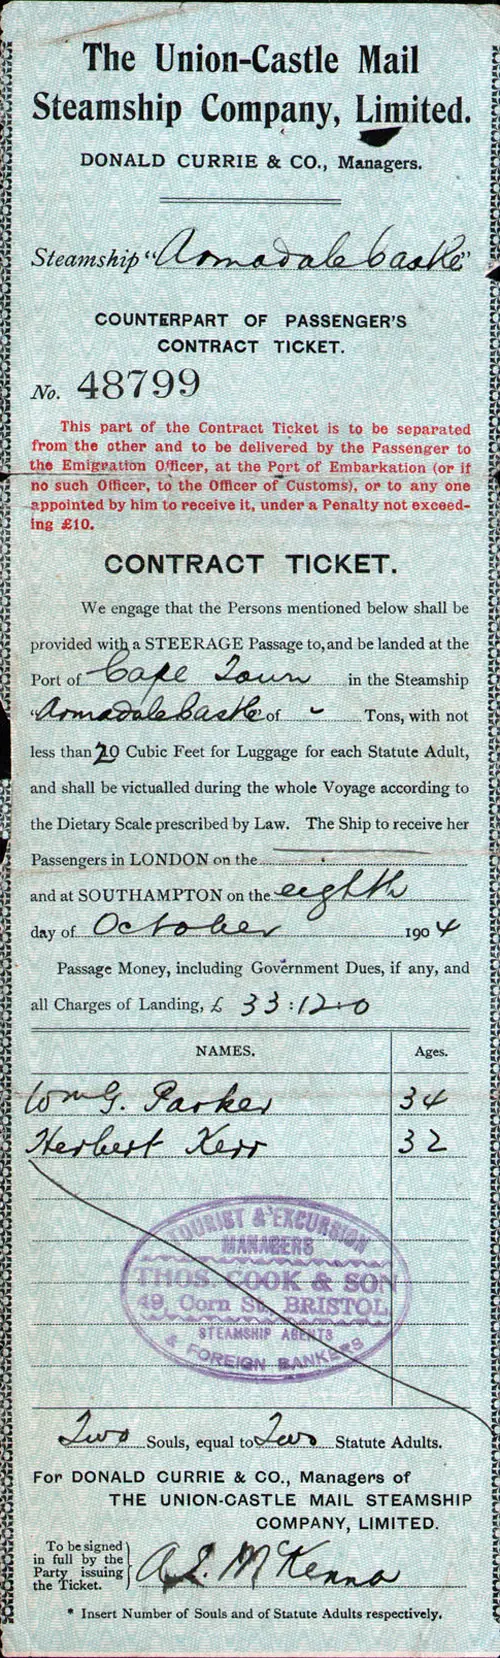 Steamship Ticket Record - Union-Castle Mail Steamship Company, Limited 1904